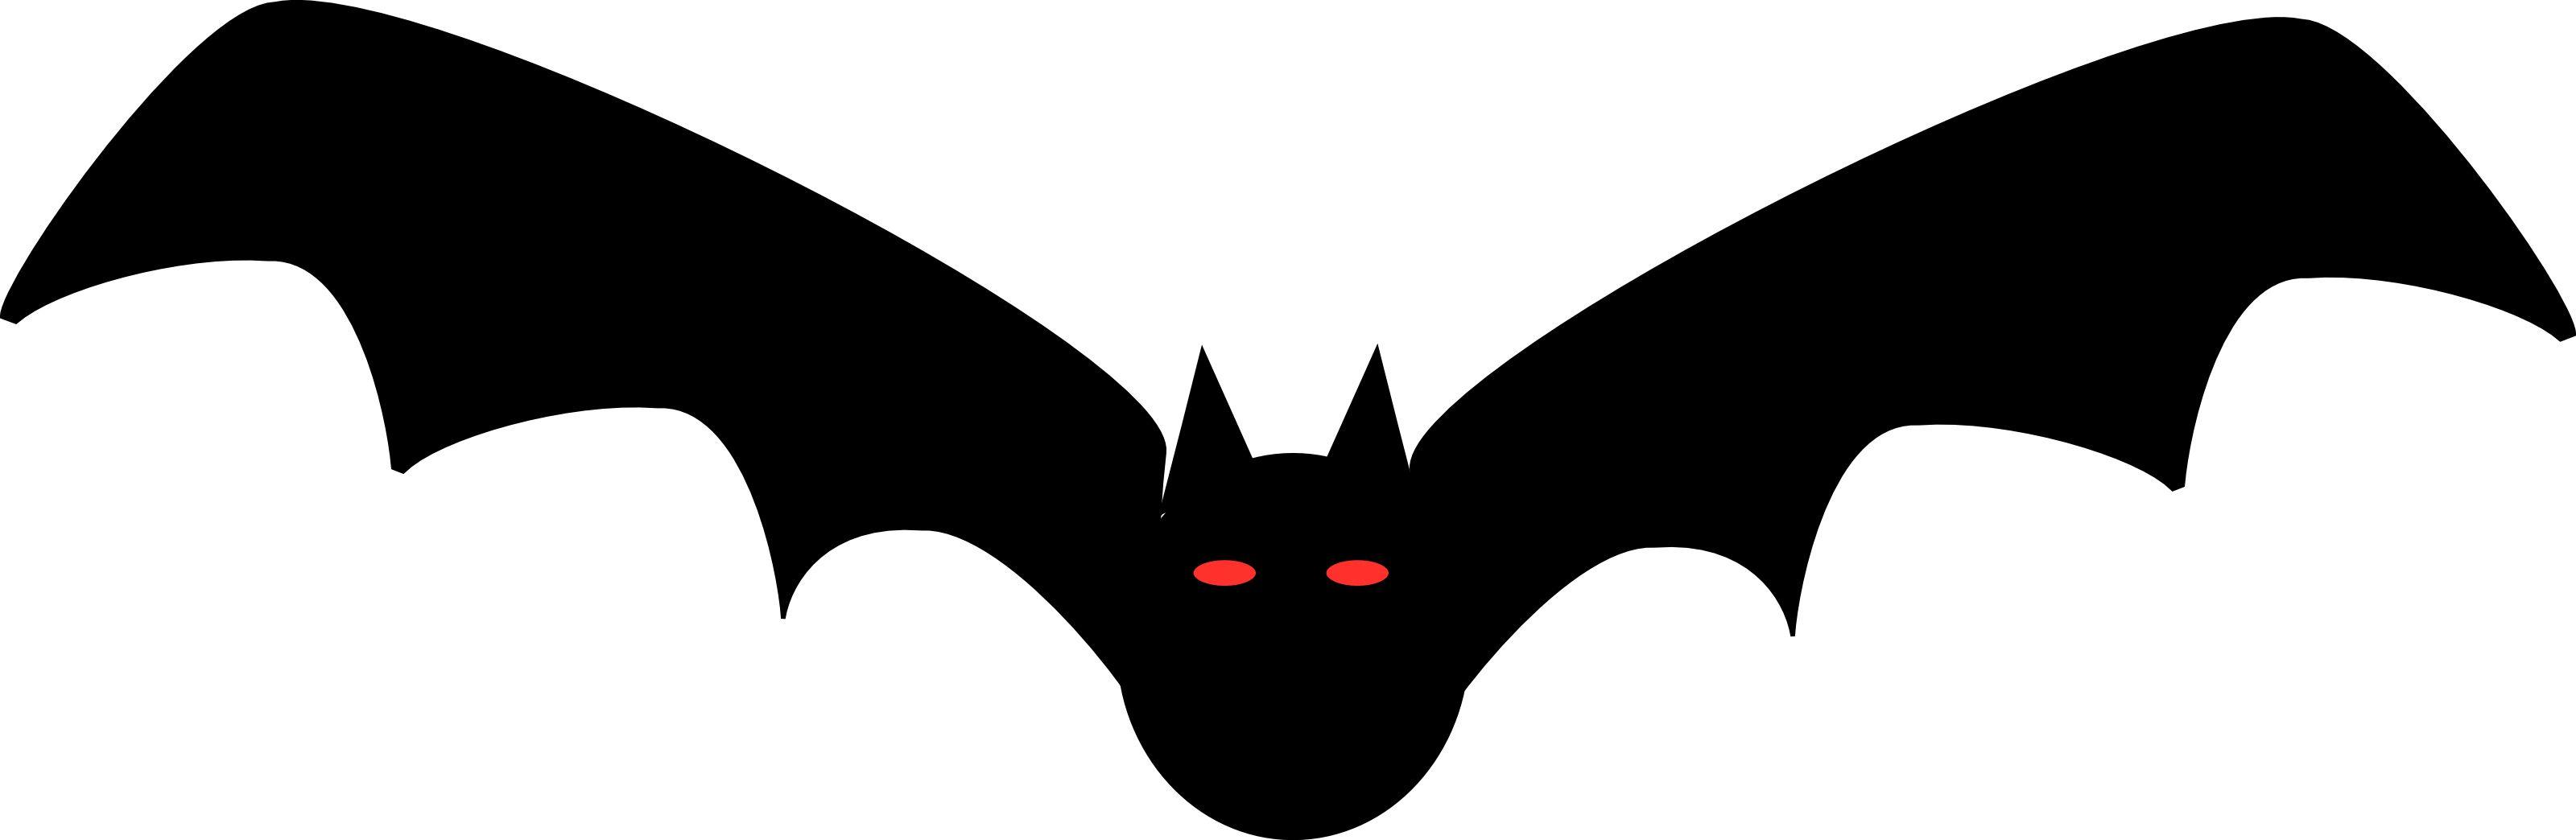 Bat with Red Background Logo - Dark Knight: The Bat and the Man | Royal Vegas Online Casino blog